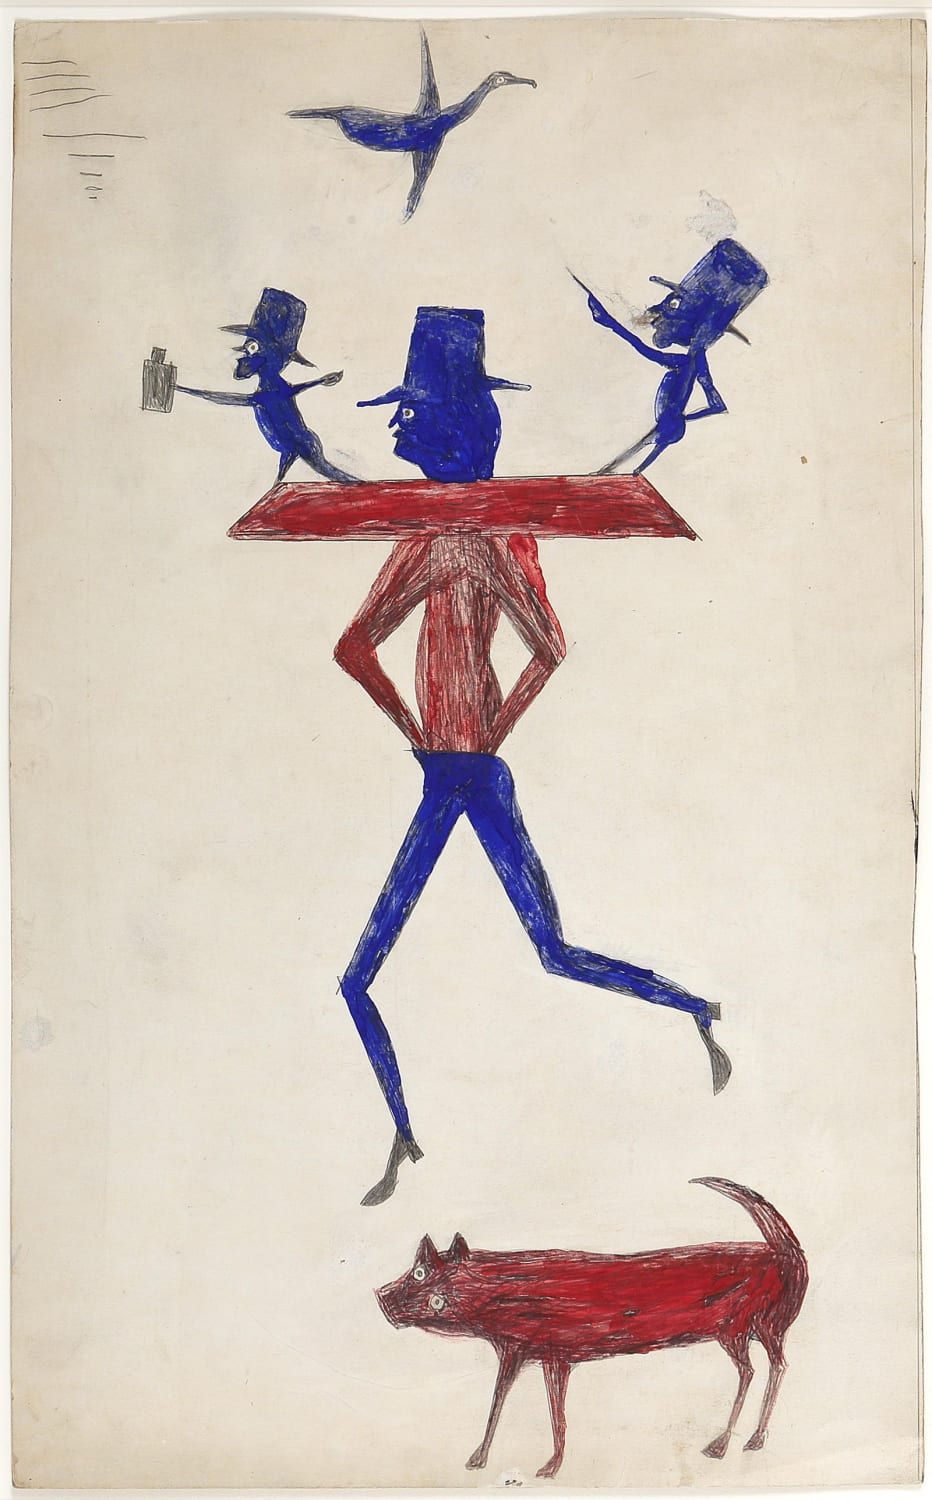 Bill Traylor Depicted His Brutal Lifetime With Vibrant Art